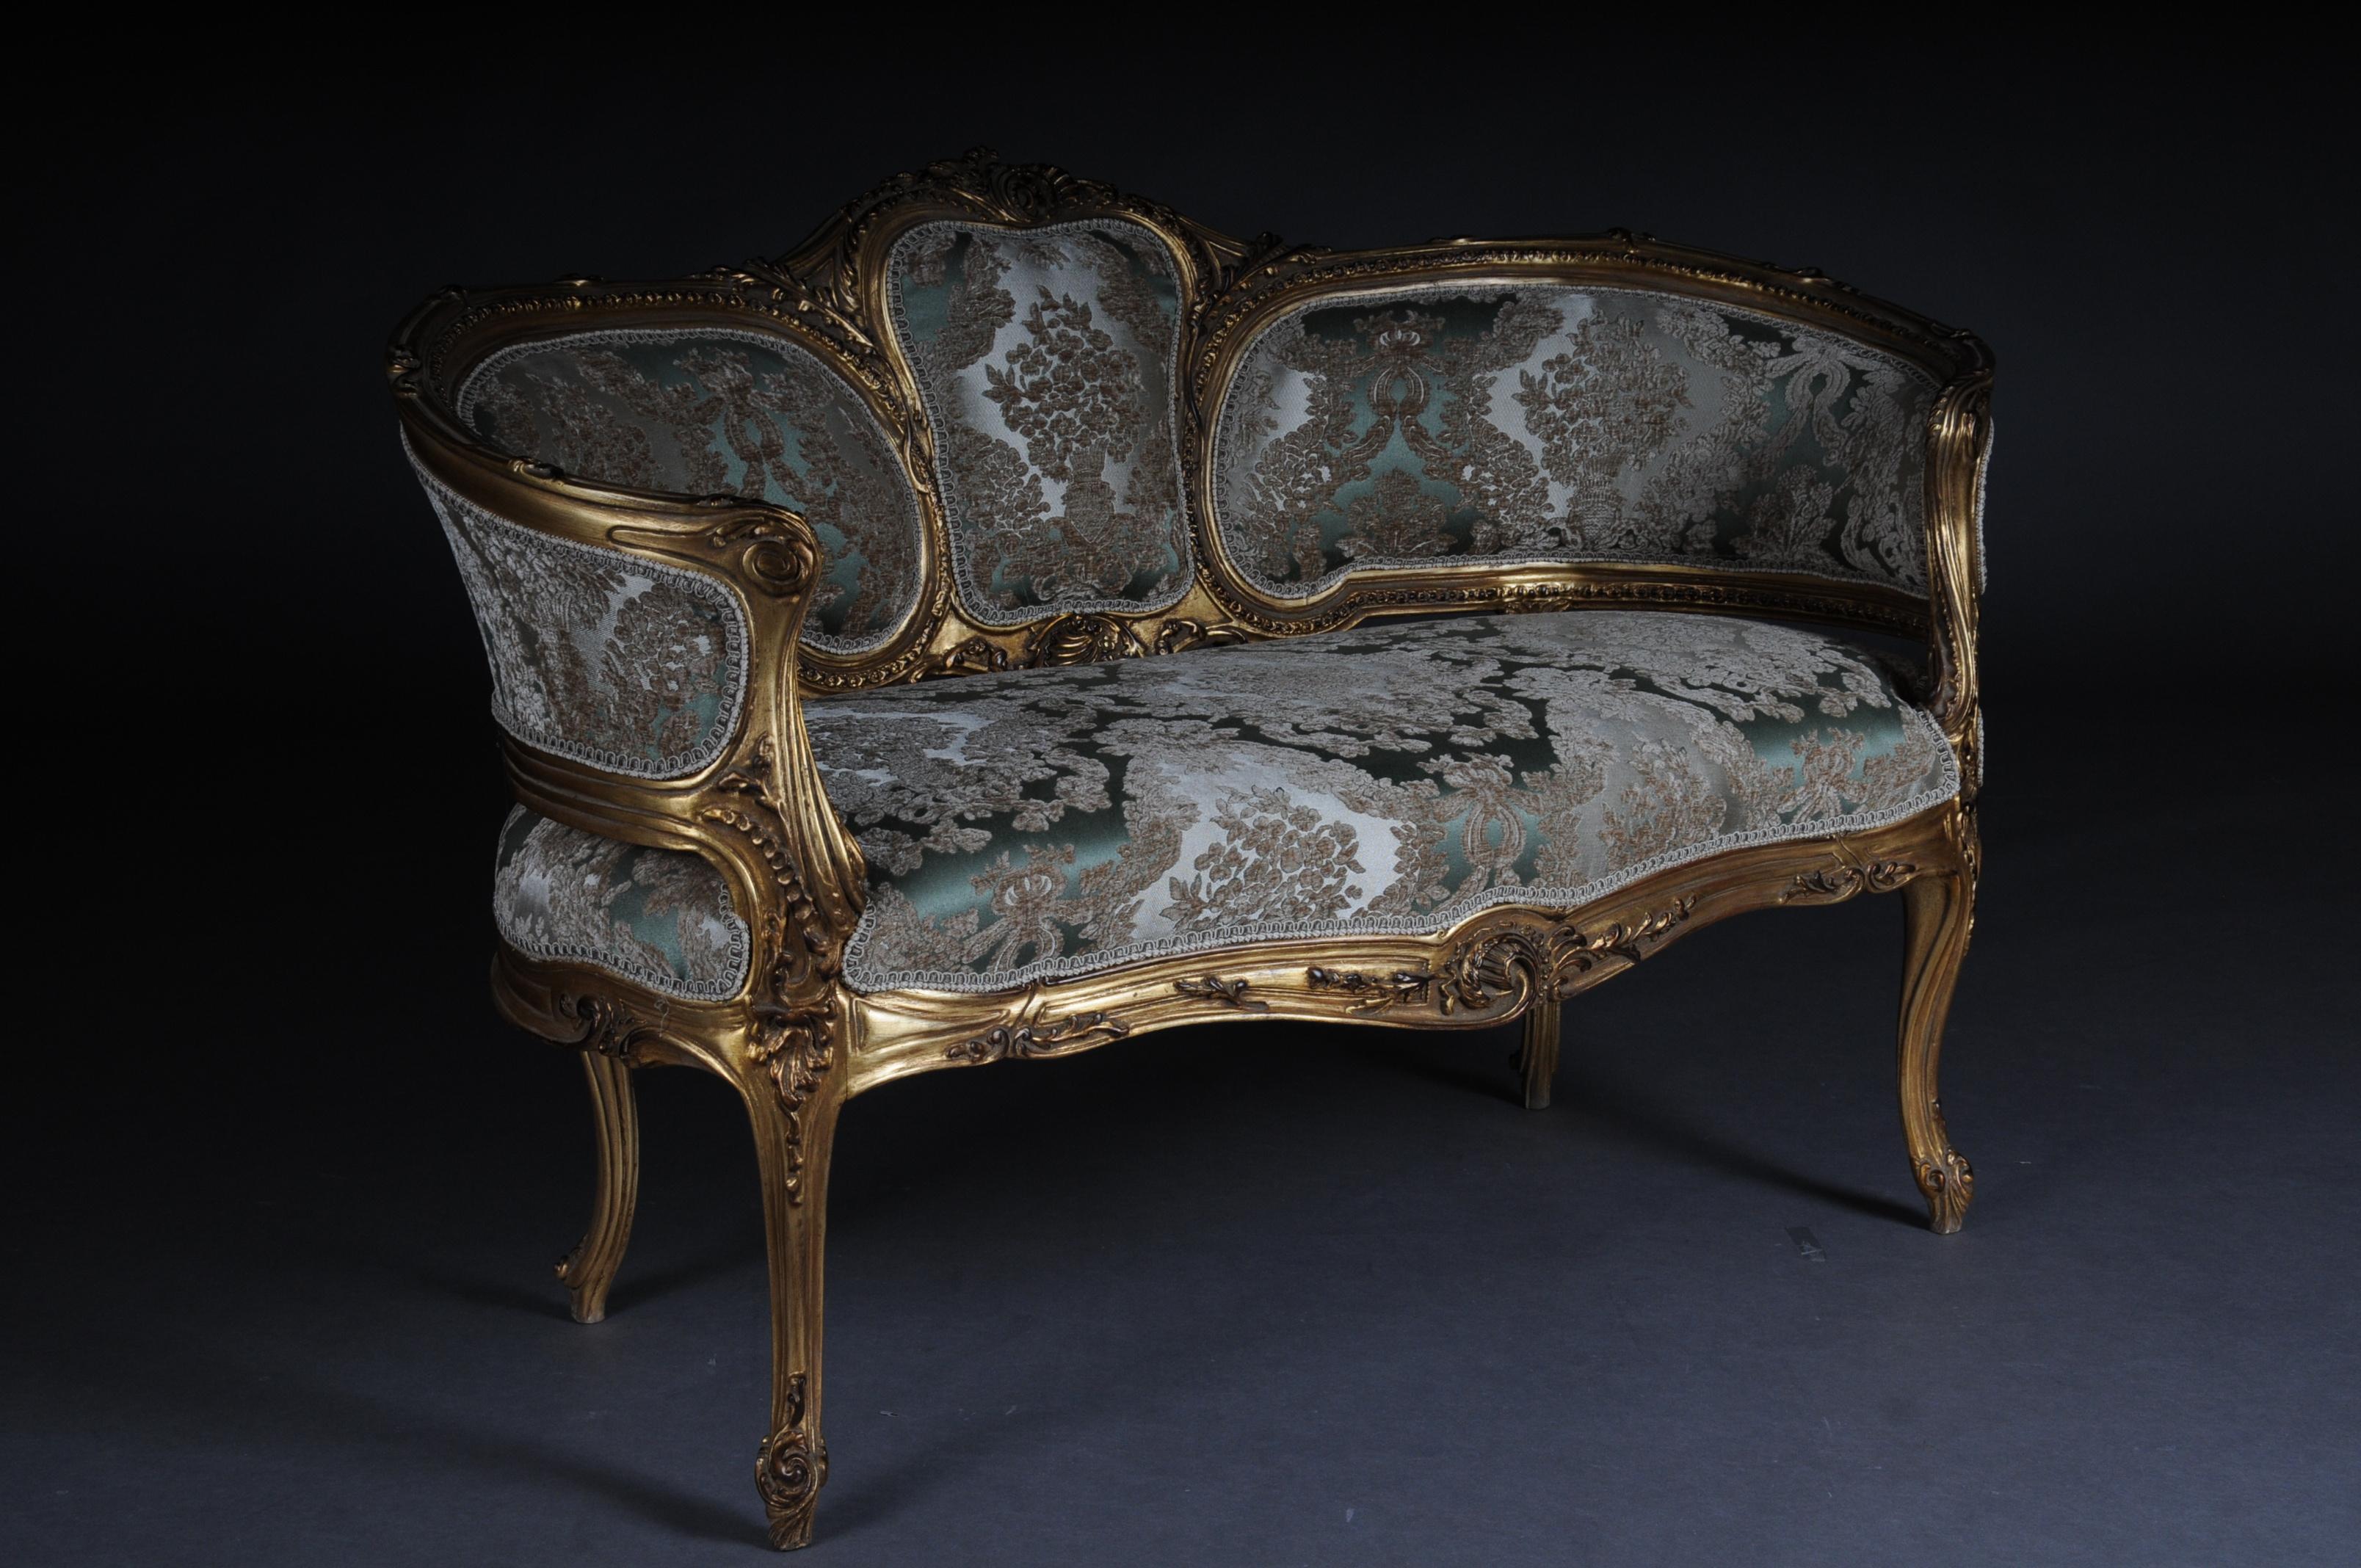 French Elegant Sofa, Couch, Canapé in Rococo or Louis XV Style